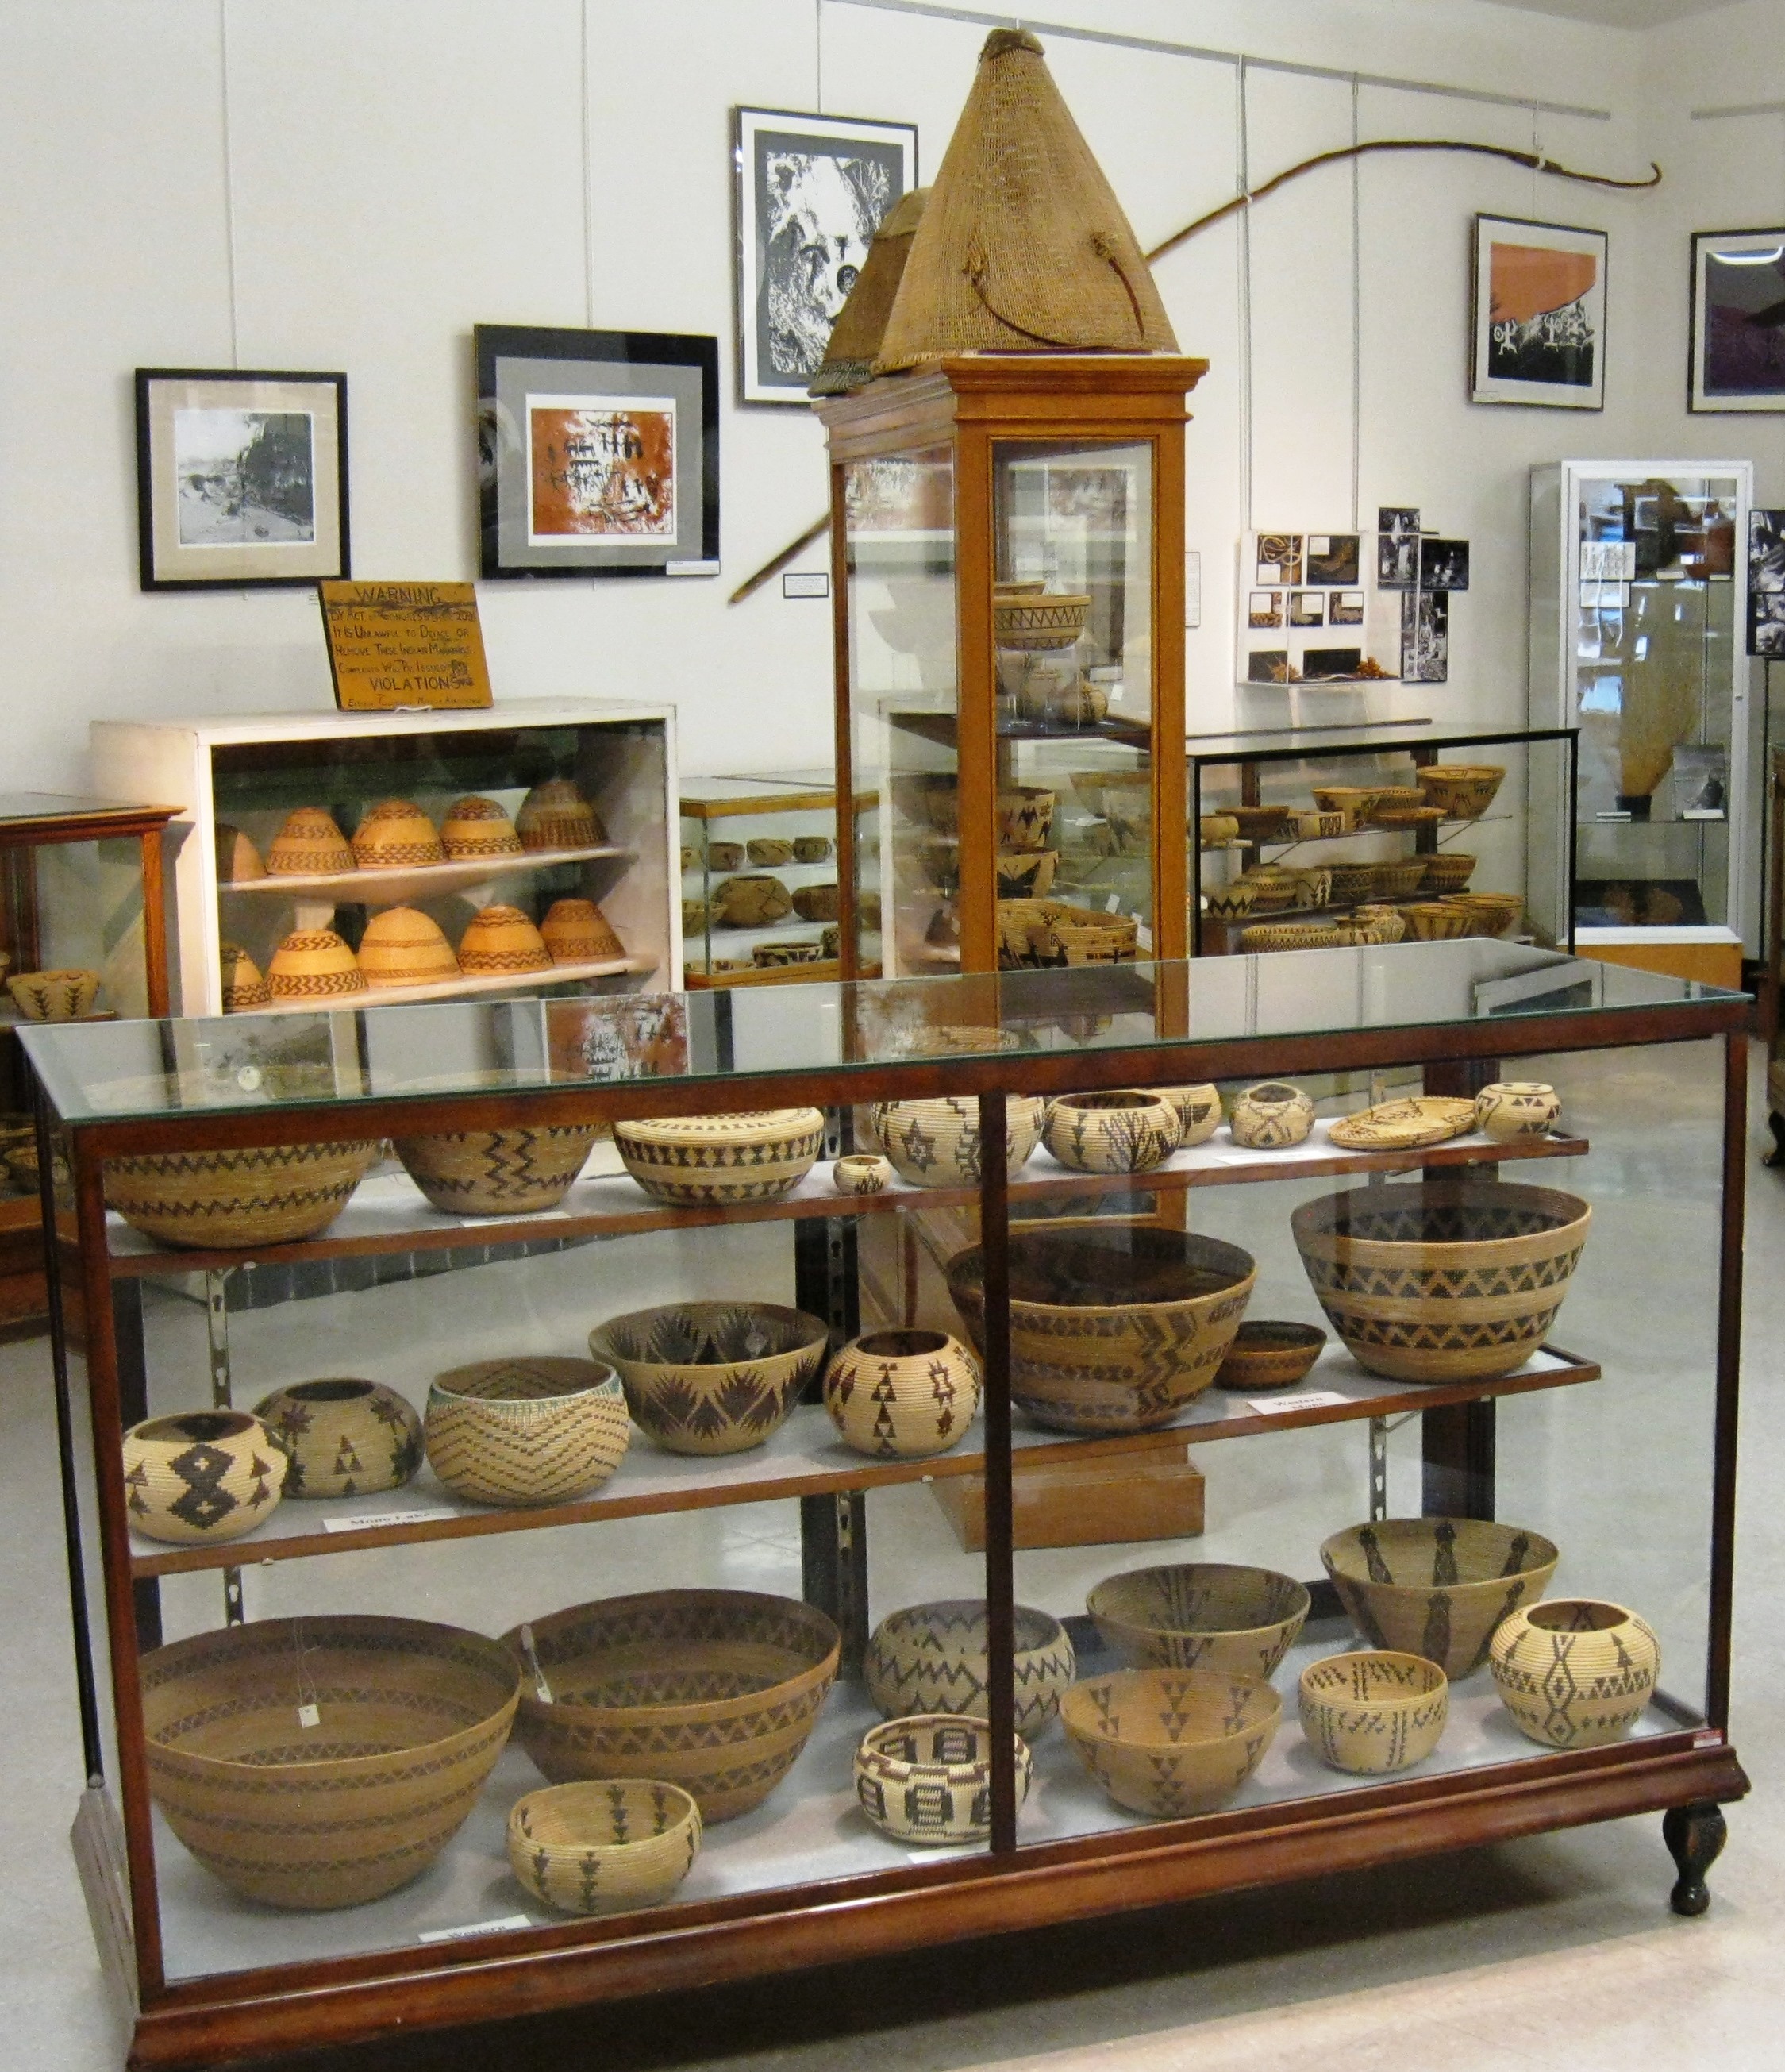 The museum has about 400 Owens Valley Paiute and Panamint Shoshone baskets on display.